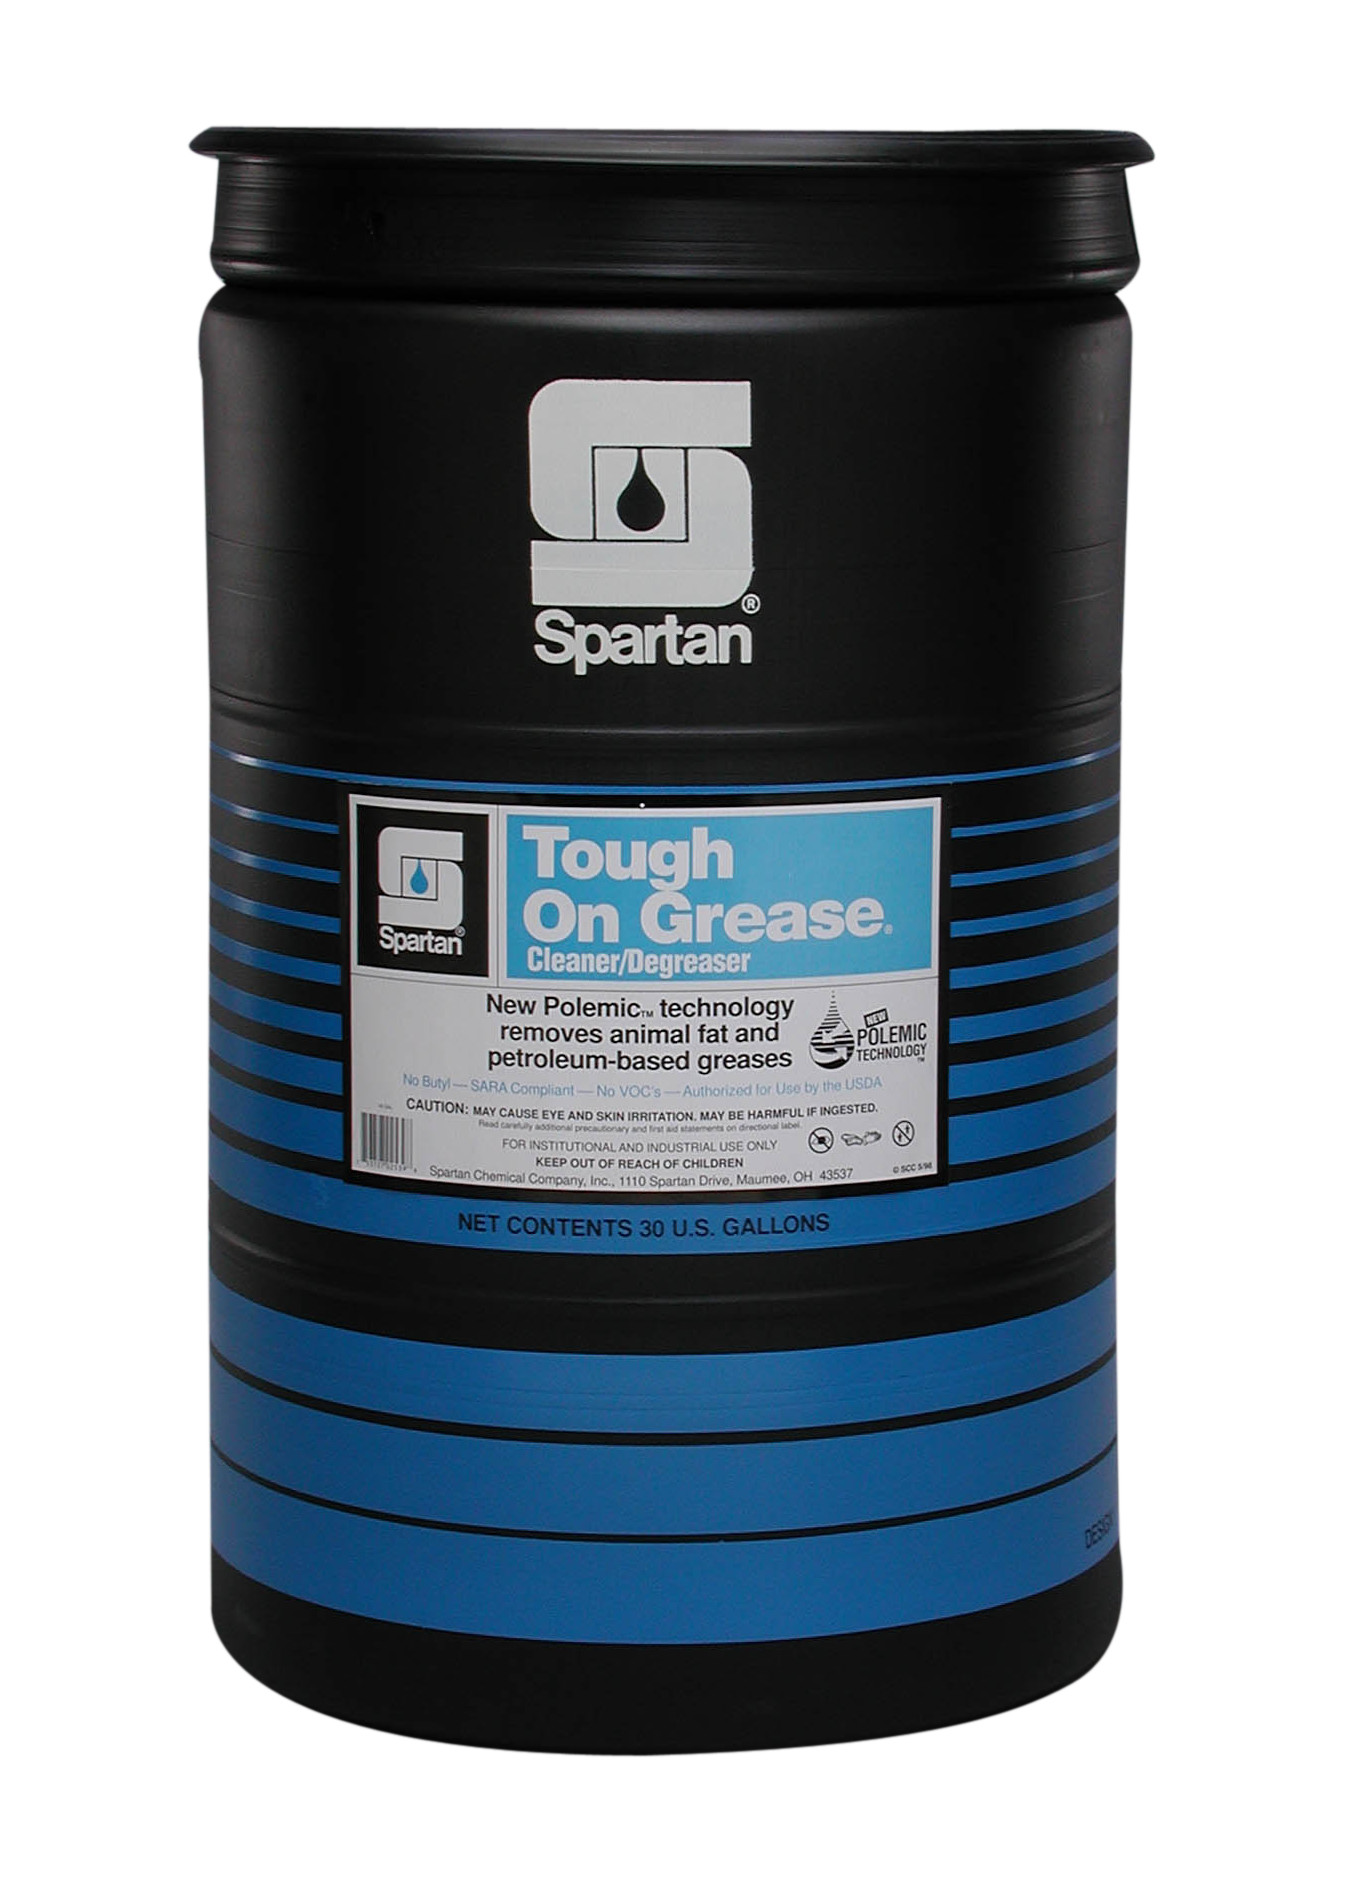 Spartan Chemical Company Tough on Grease, 30 GAL DRUM